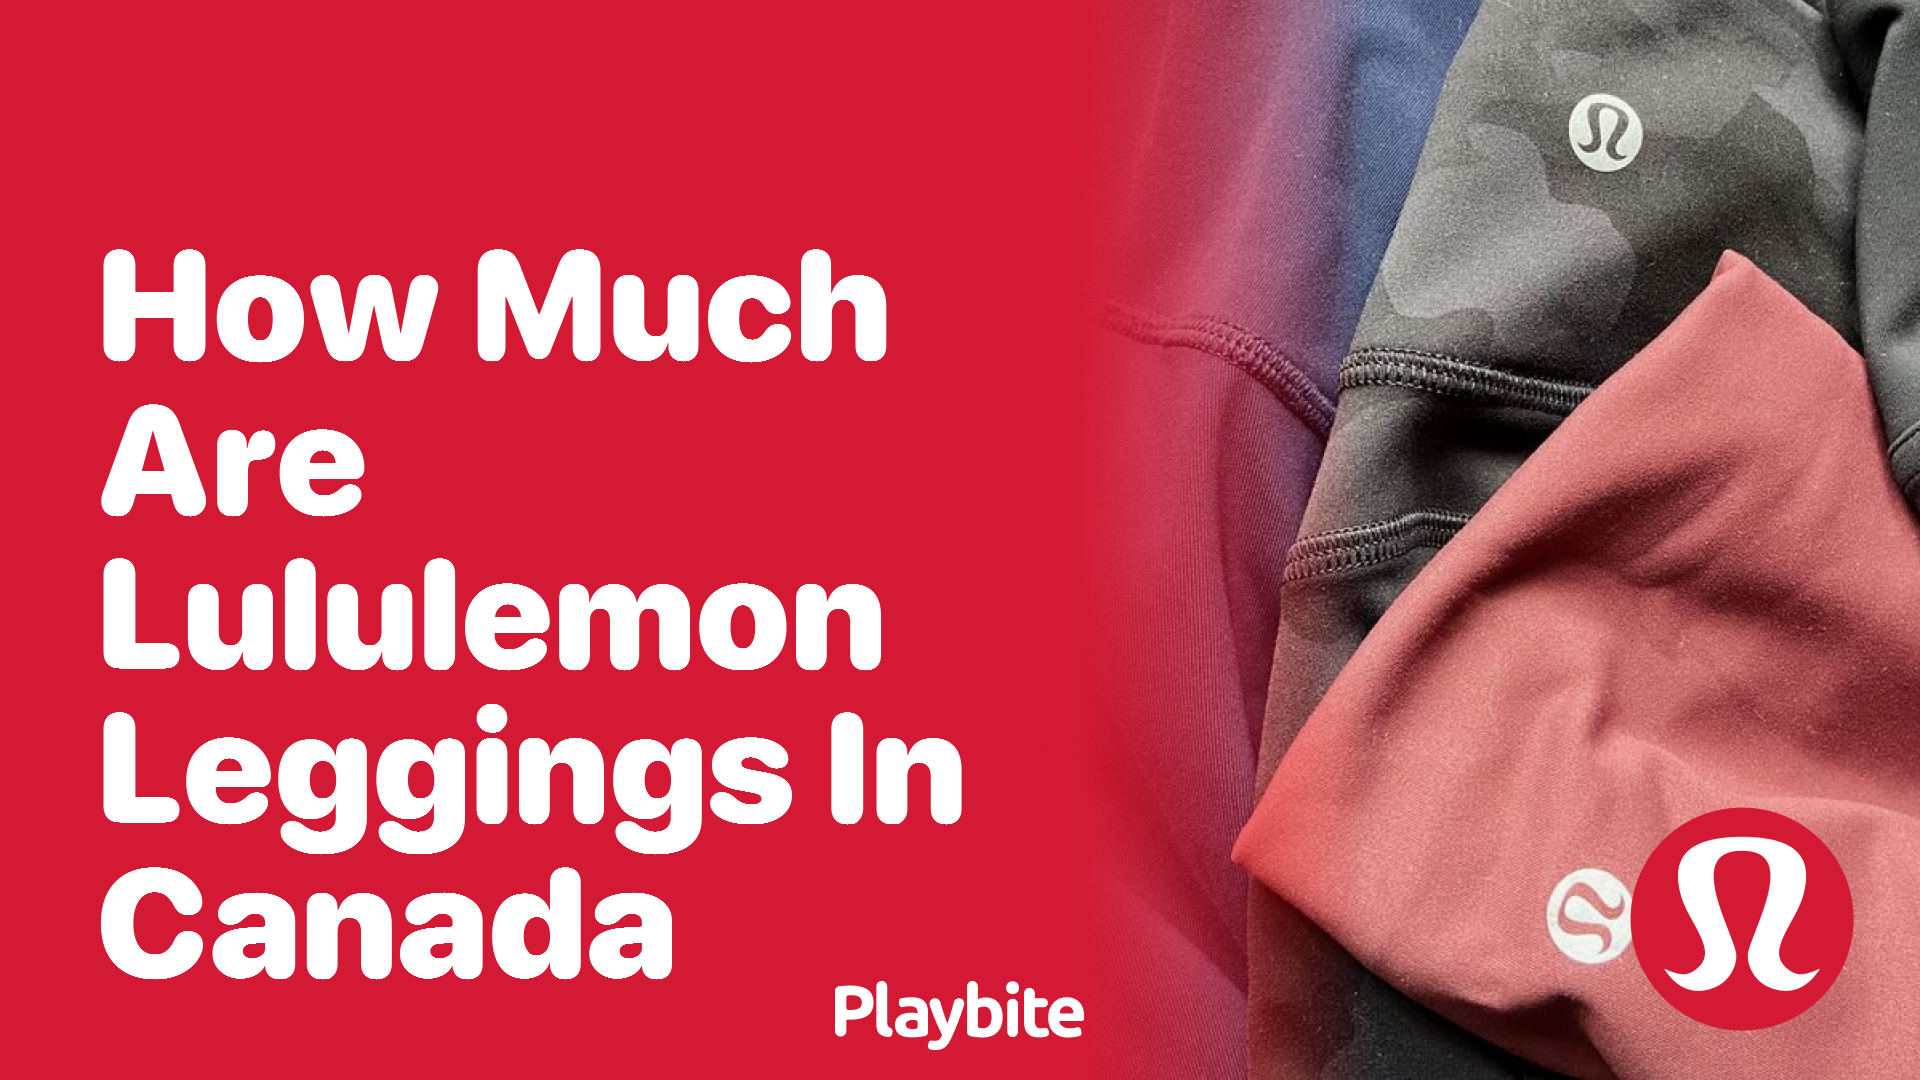 How Much Do Lululemon Leggings Cost in Canada? - Playbite